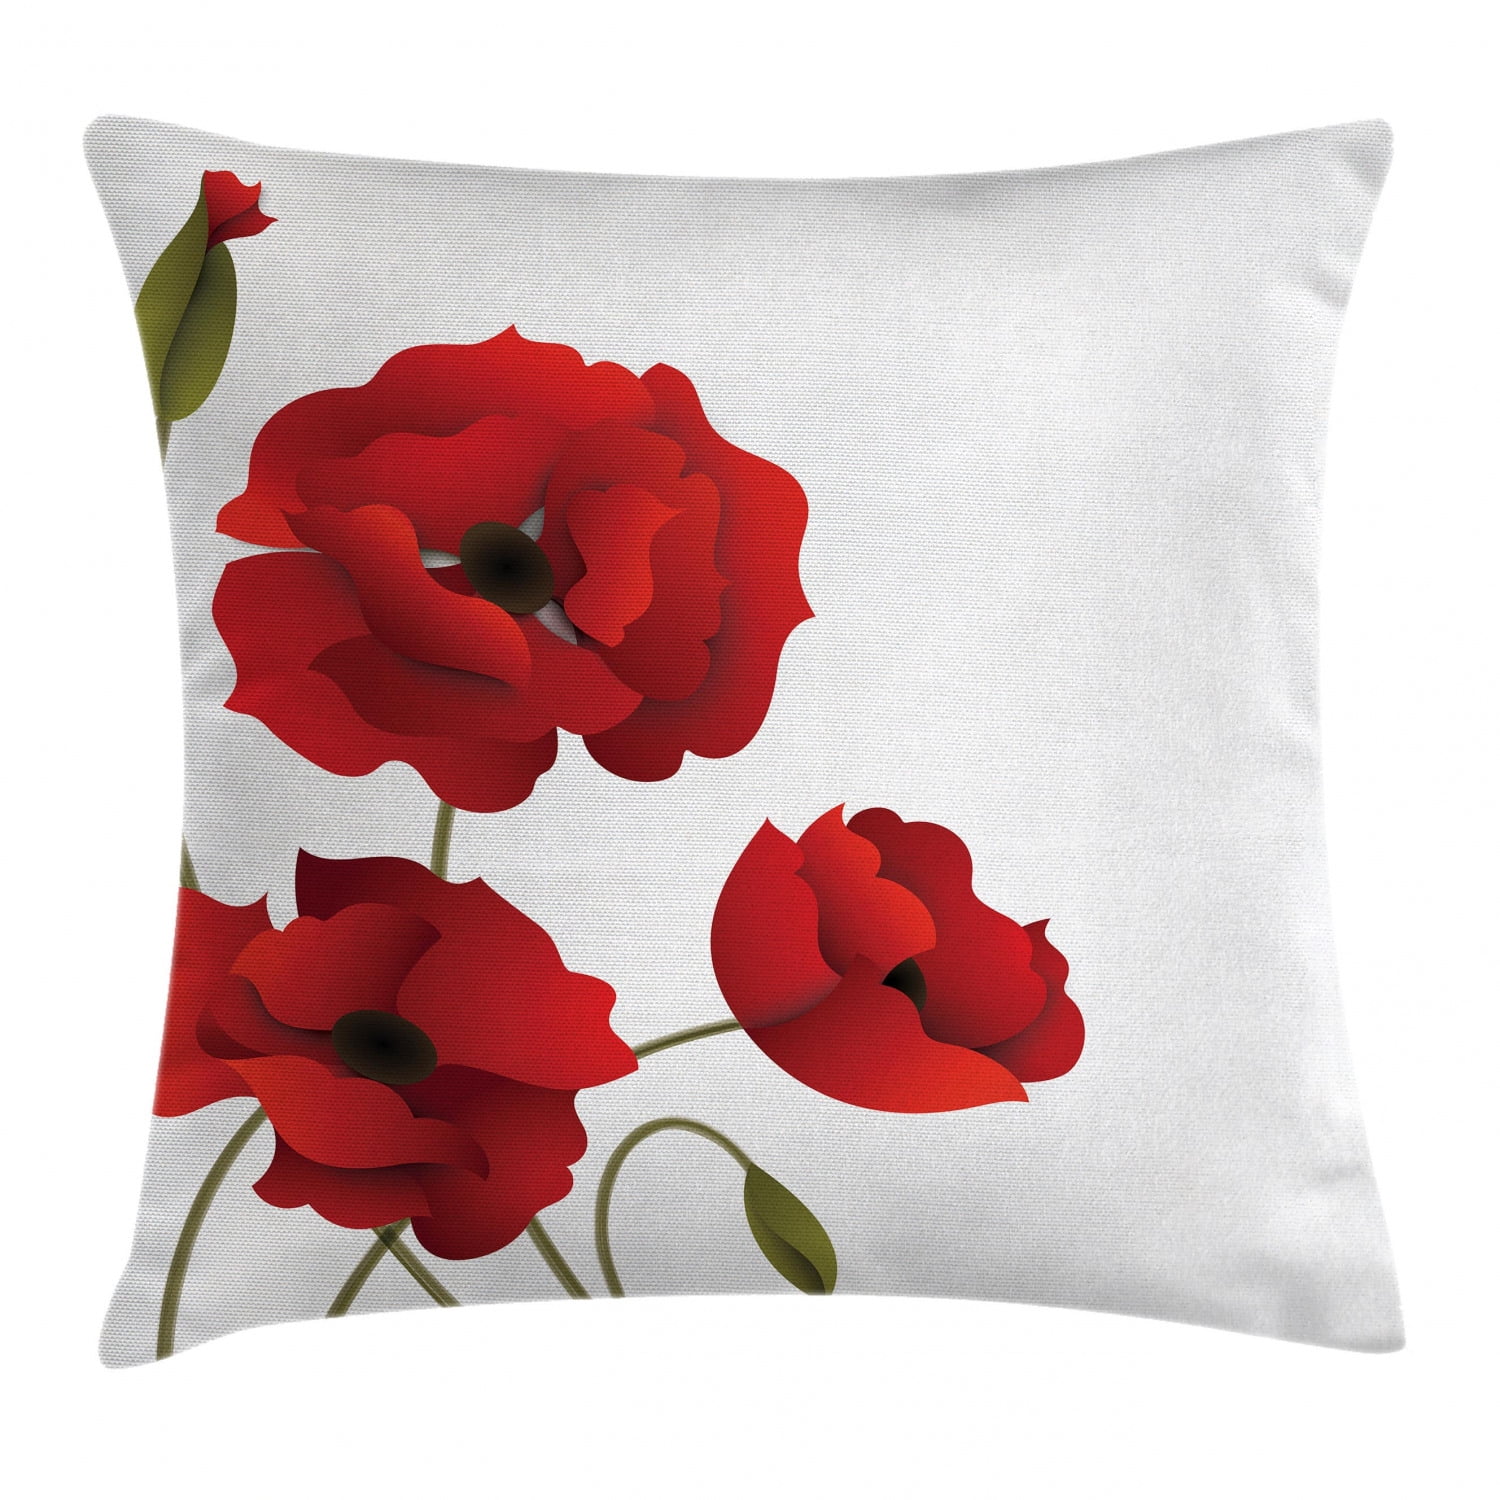 Floral Throw Pillow Cushion Cover, Poppy Flowers Bright Petals with ...